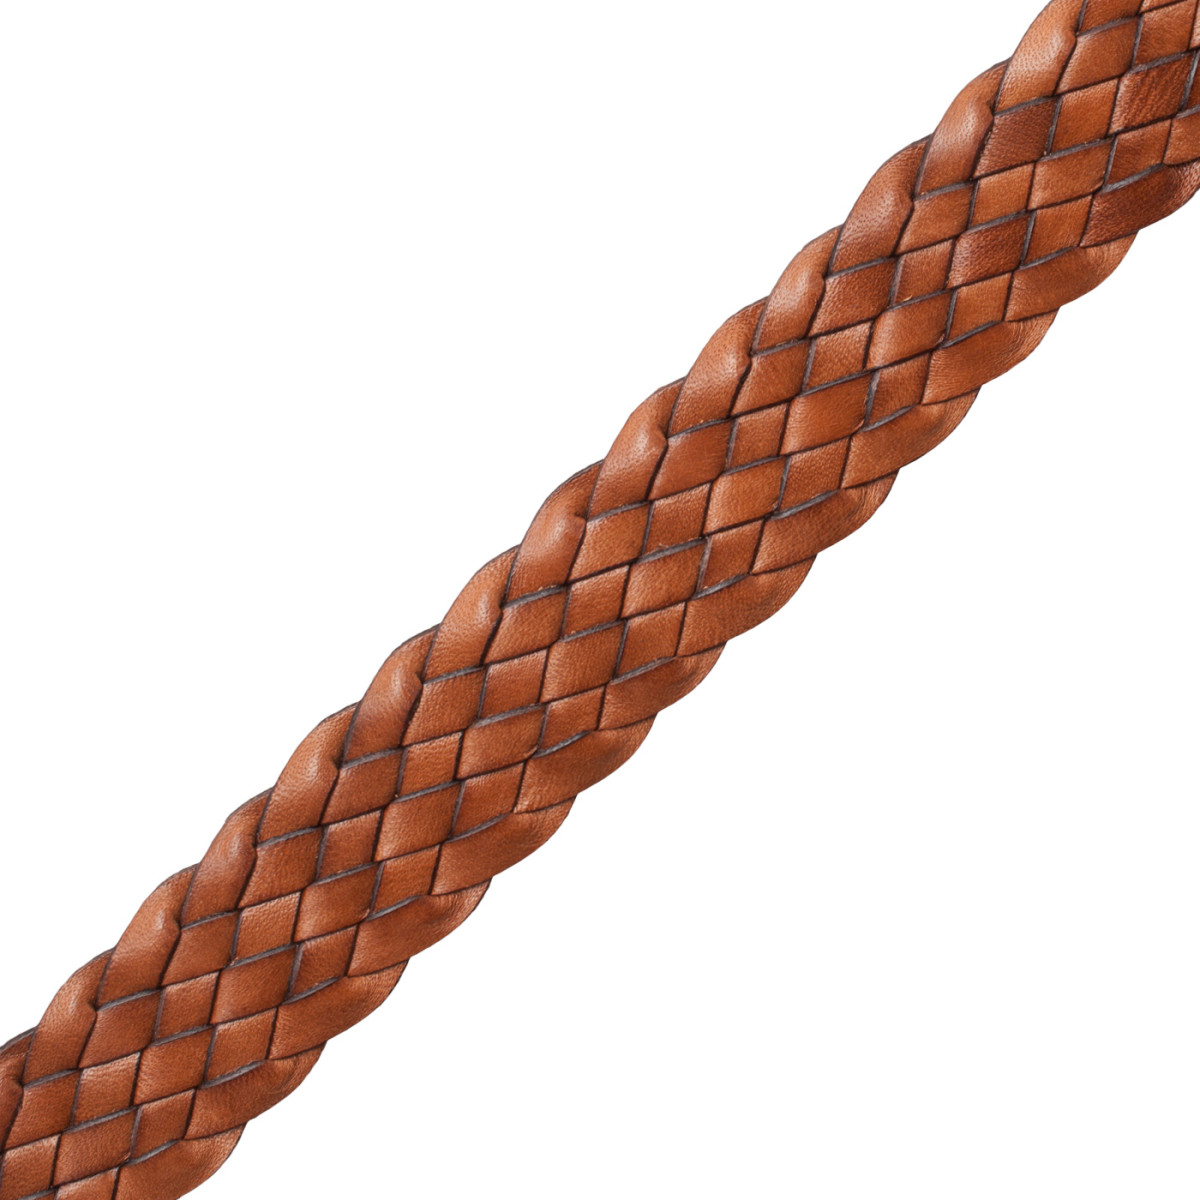 1 WOVEN LEATHER BRAID - SADDLE - Samuel and Sons